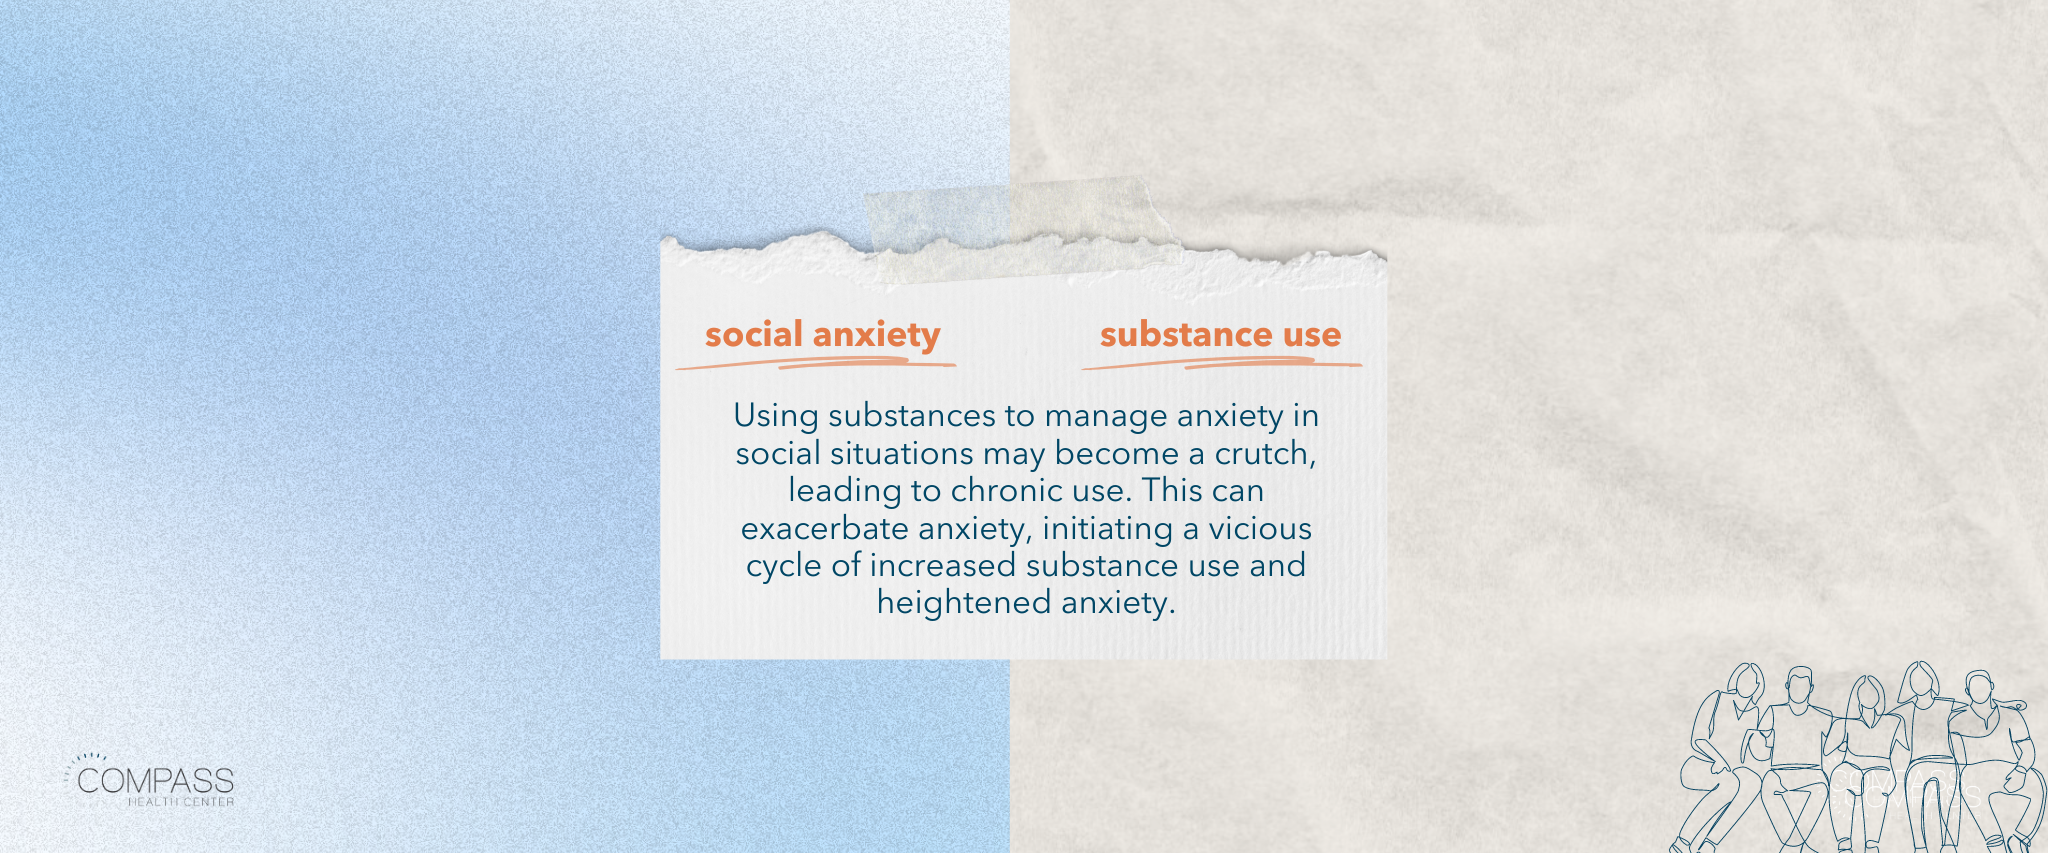 Link Between Social Anxiety & Substance Use